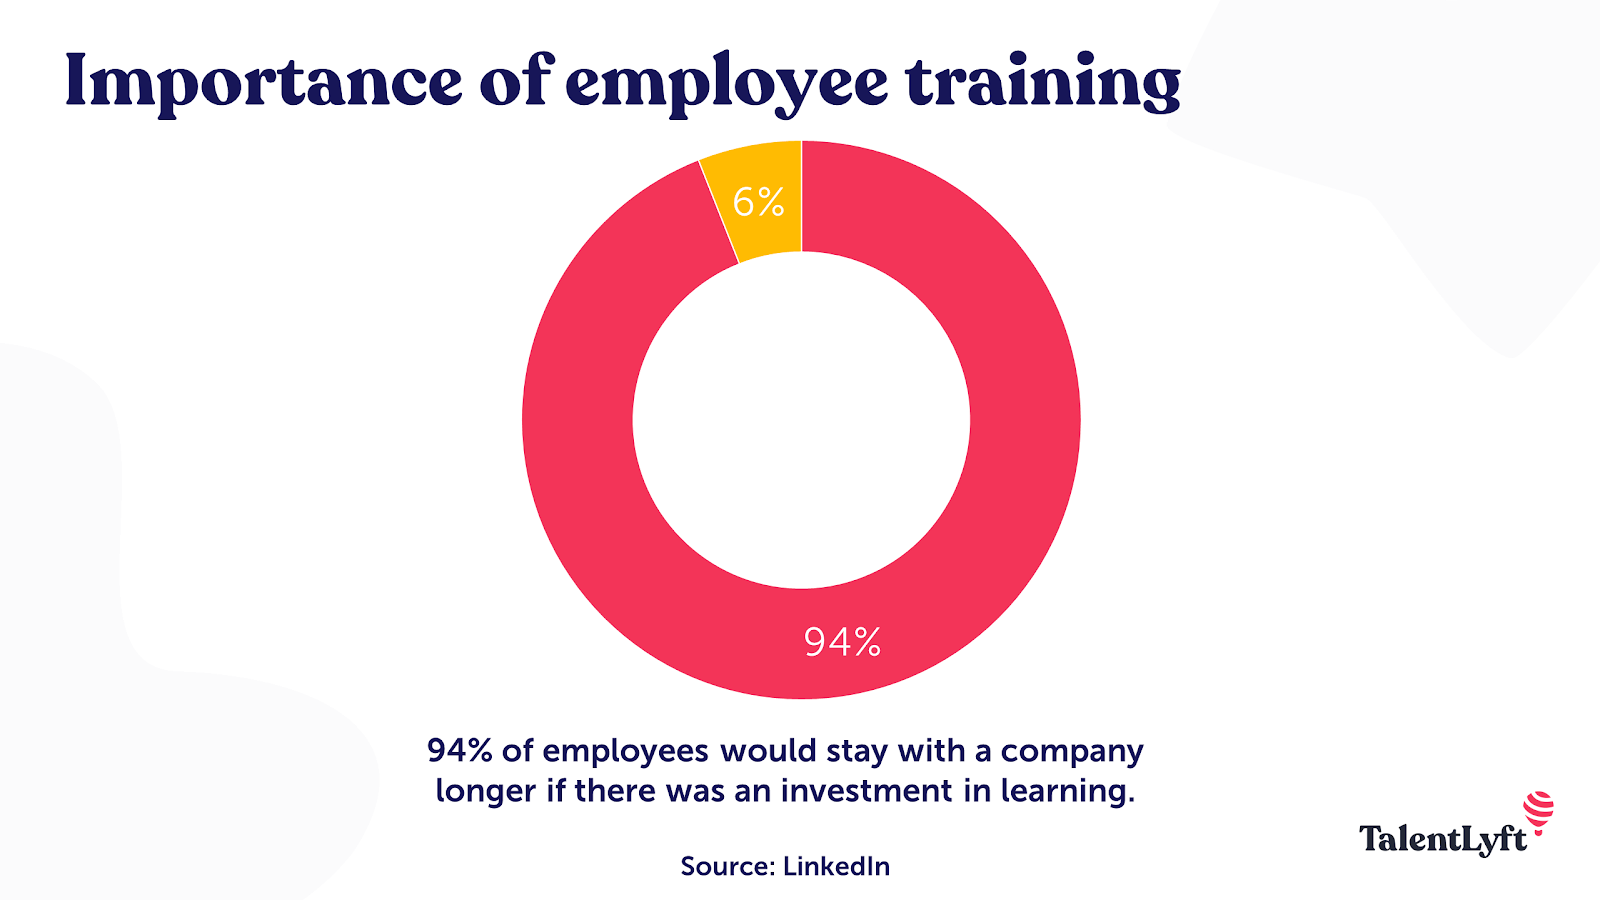 Employee training and learning